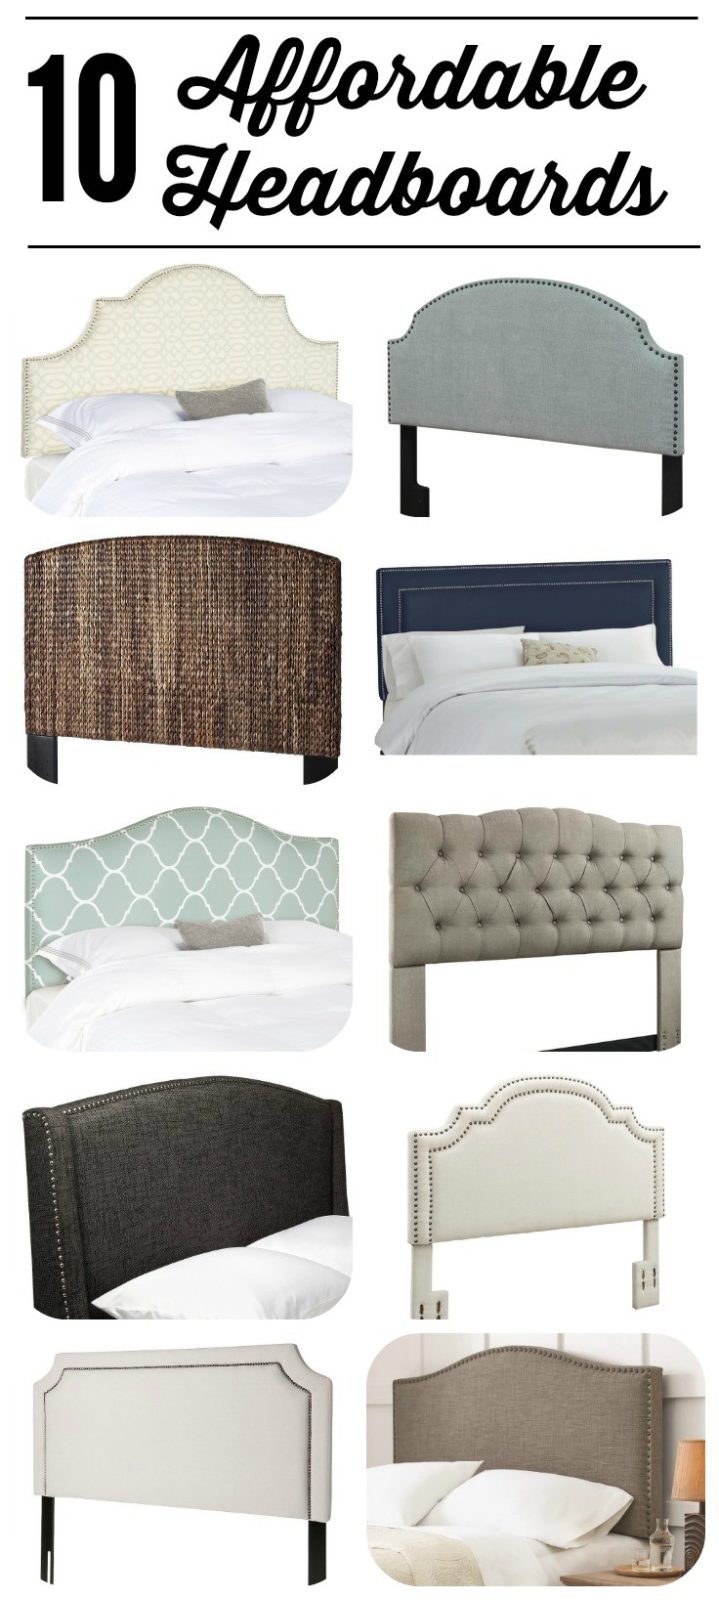 WOW! All of these gorgeous headboards are UNDER $300! Fabulous source list of affordable headboards by Designer Trapped in a Lawyer's Body.